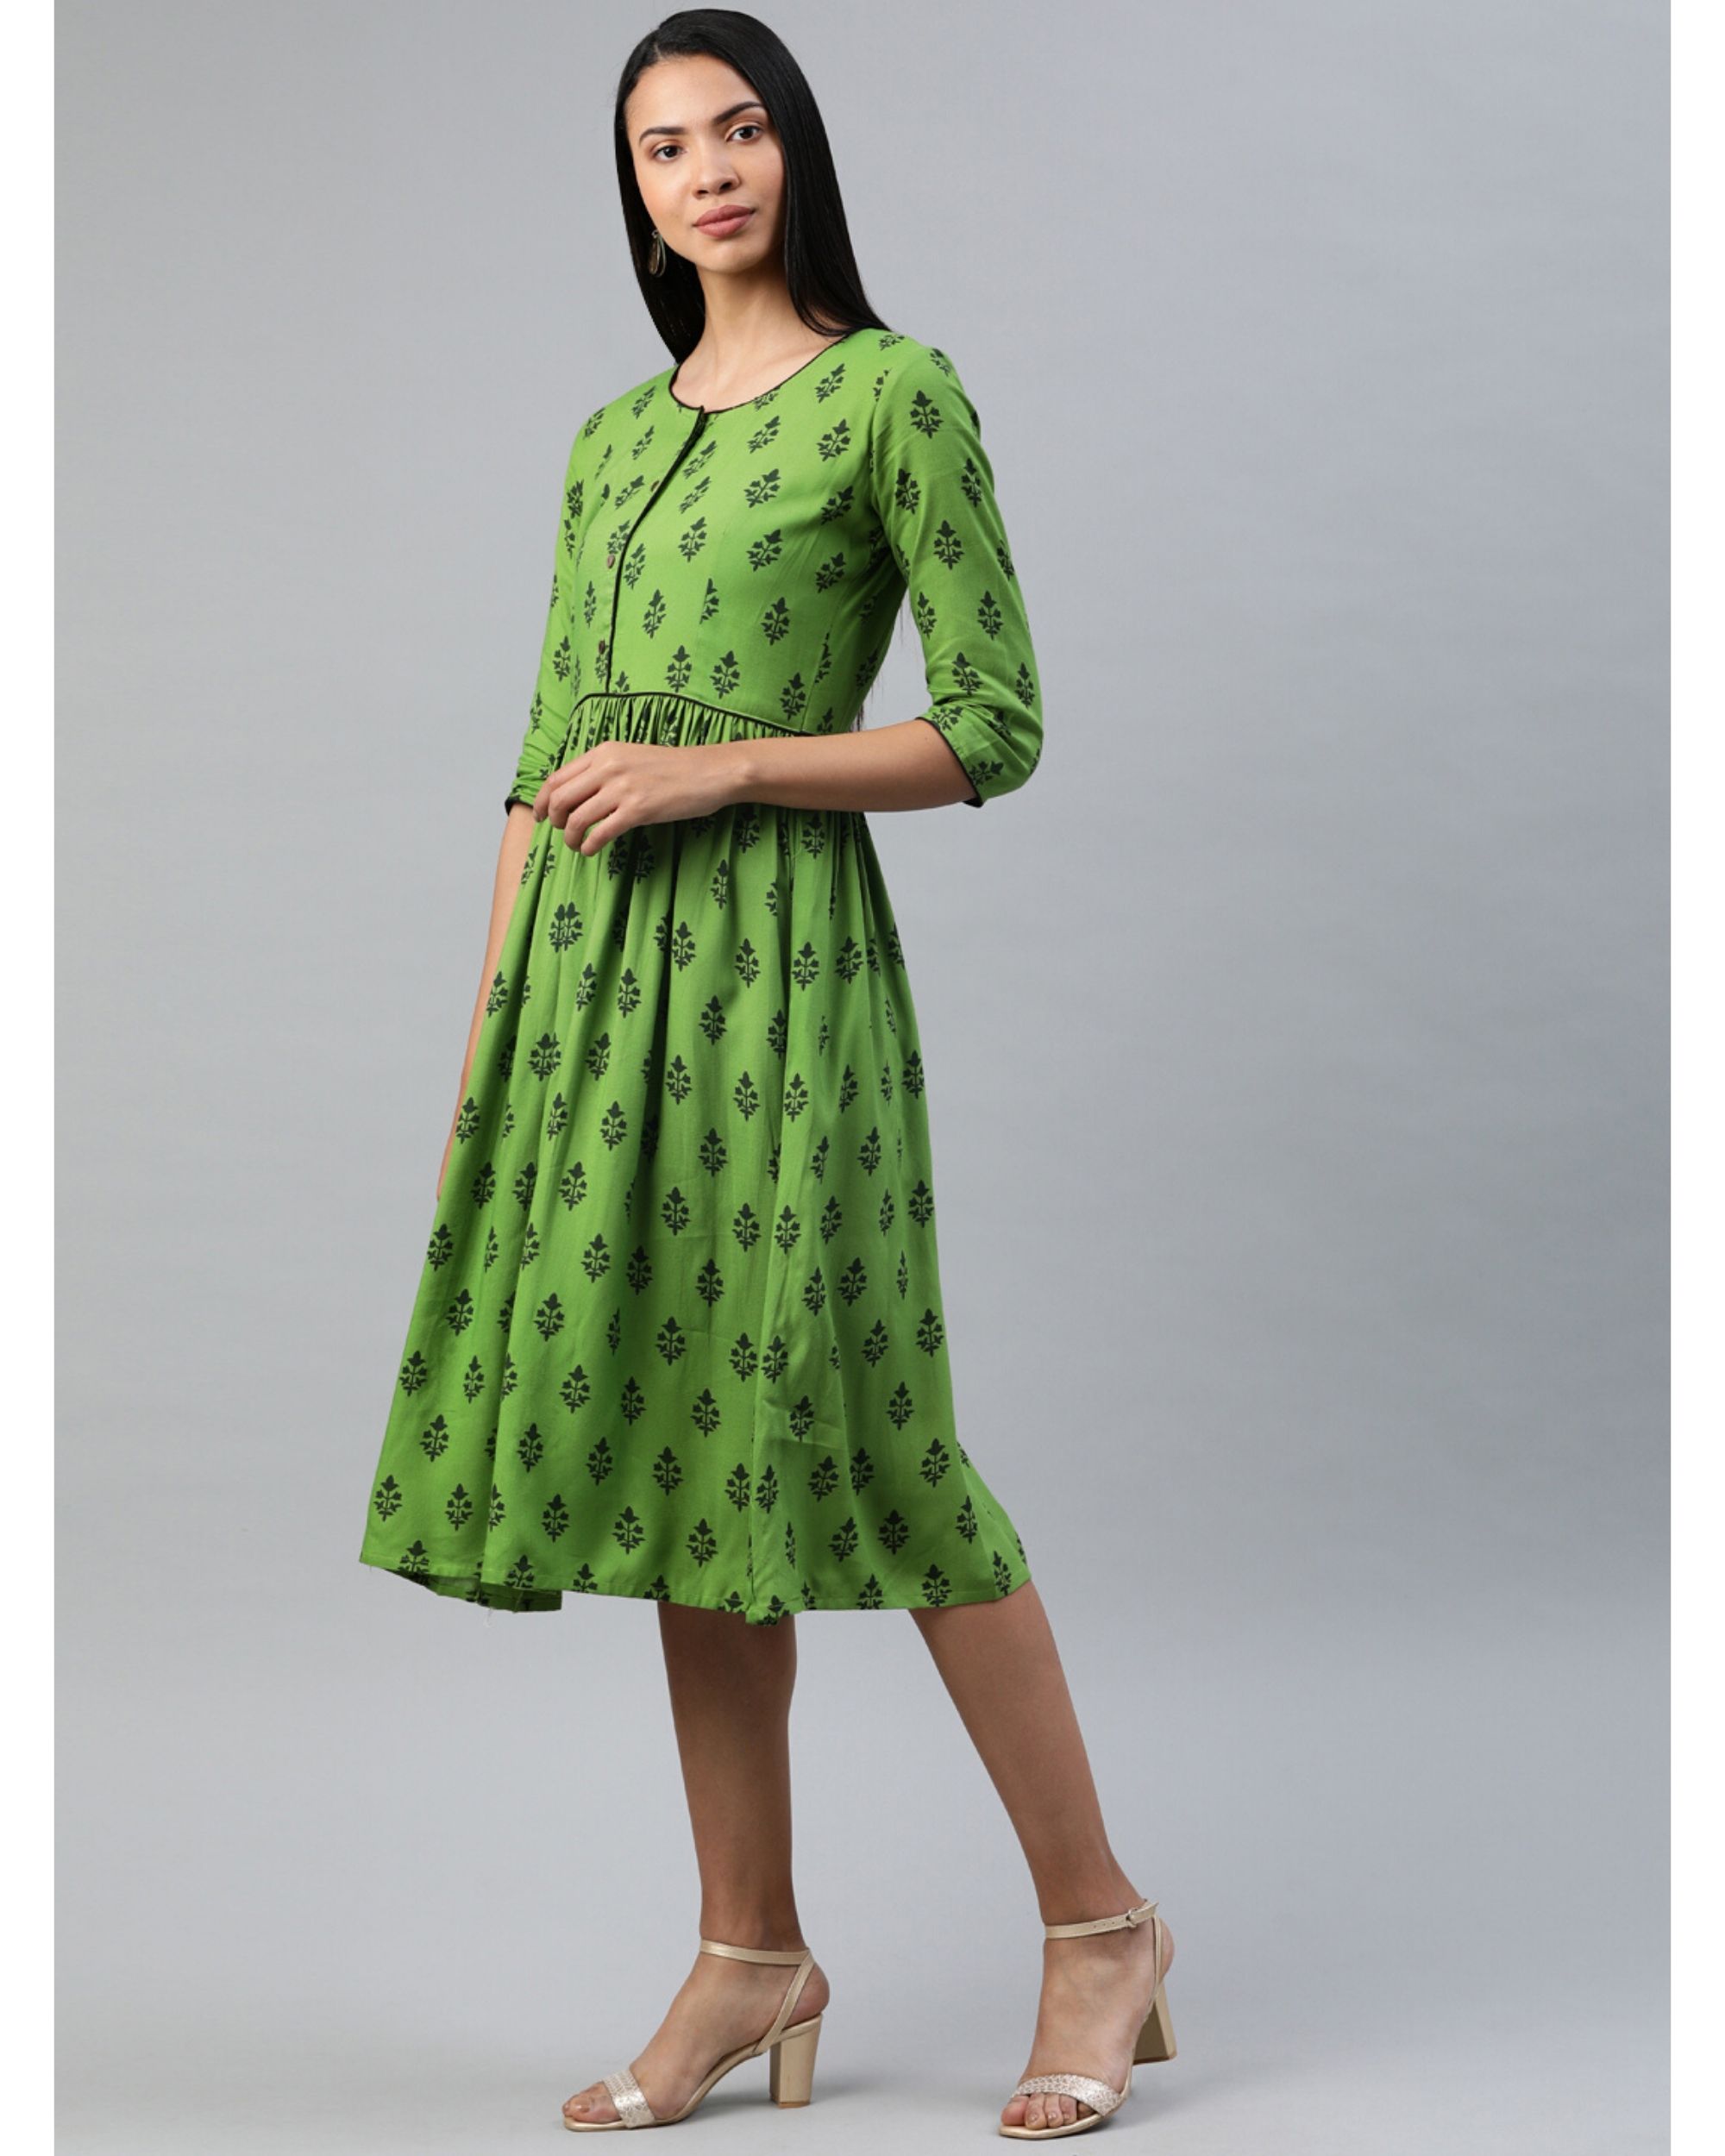 Green Floral Gathered Dress By Swishchick 